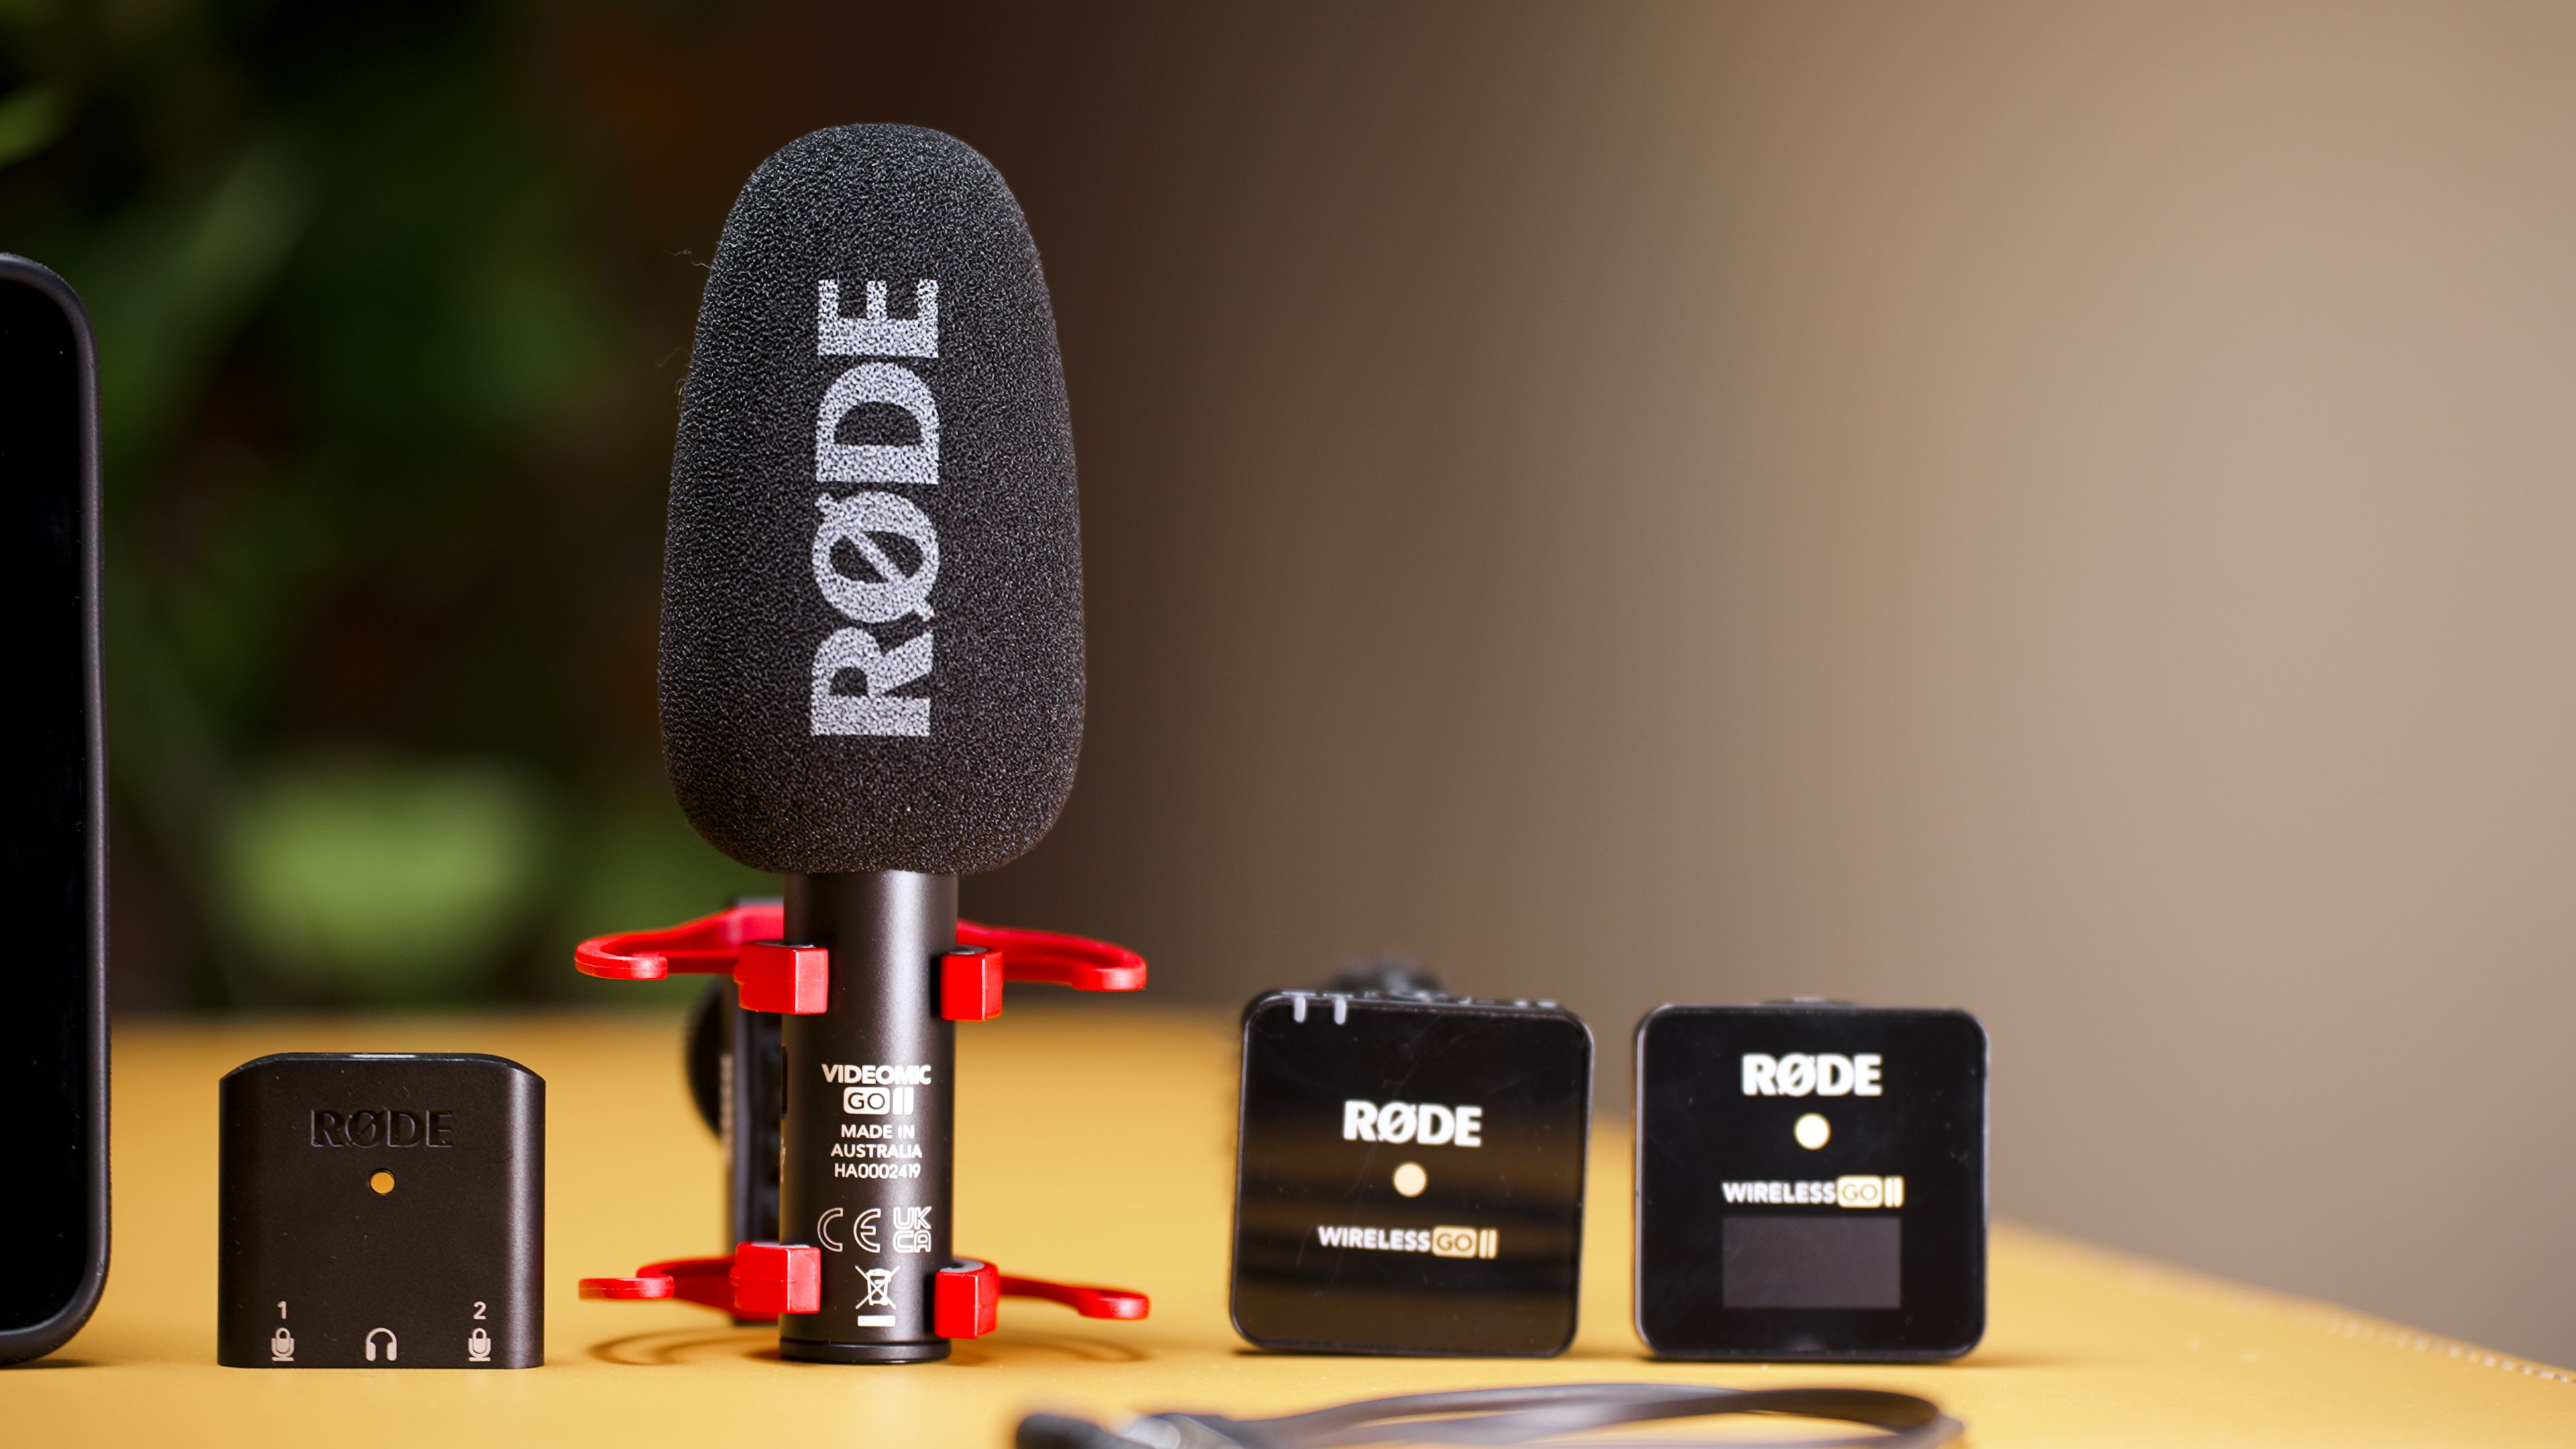 Rode VideoMic GO II Review - A $99 All-Purpose Mic, But It's No VideoMic NTG